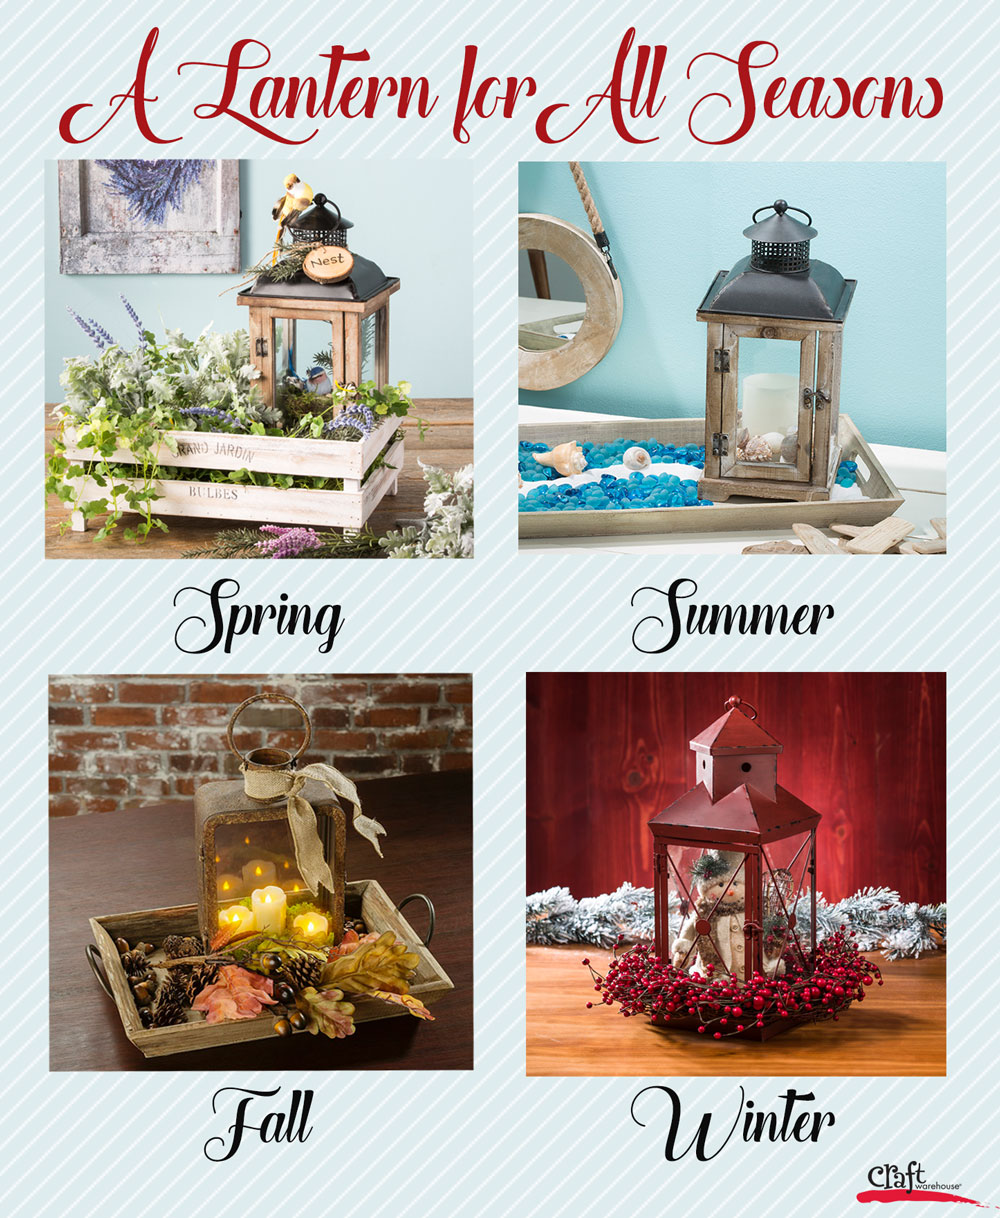 A Lantern for all Seasons at Craft Warehouse